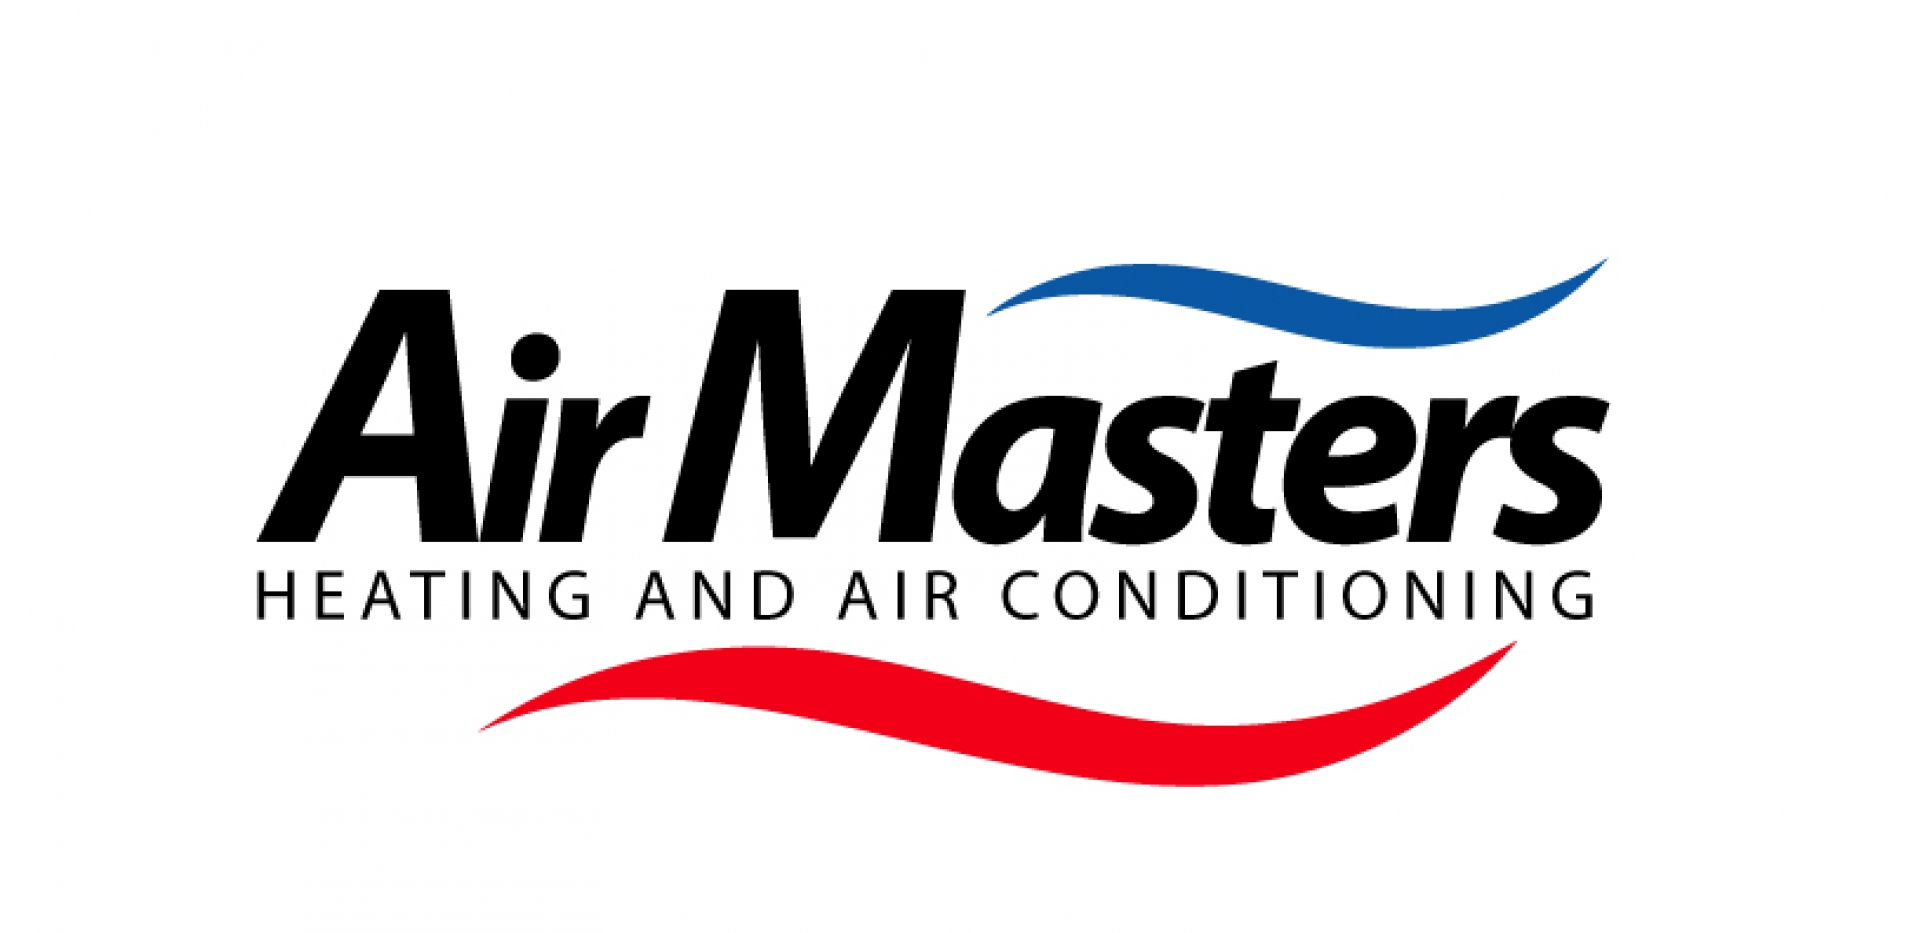 Air Masters Heating and Air Conditioning Inc. logo